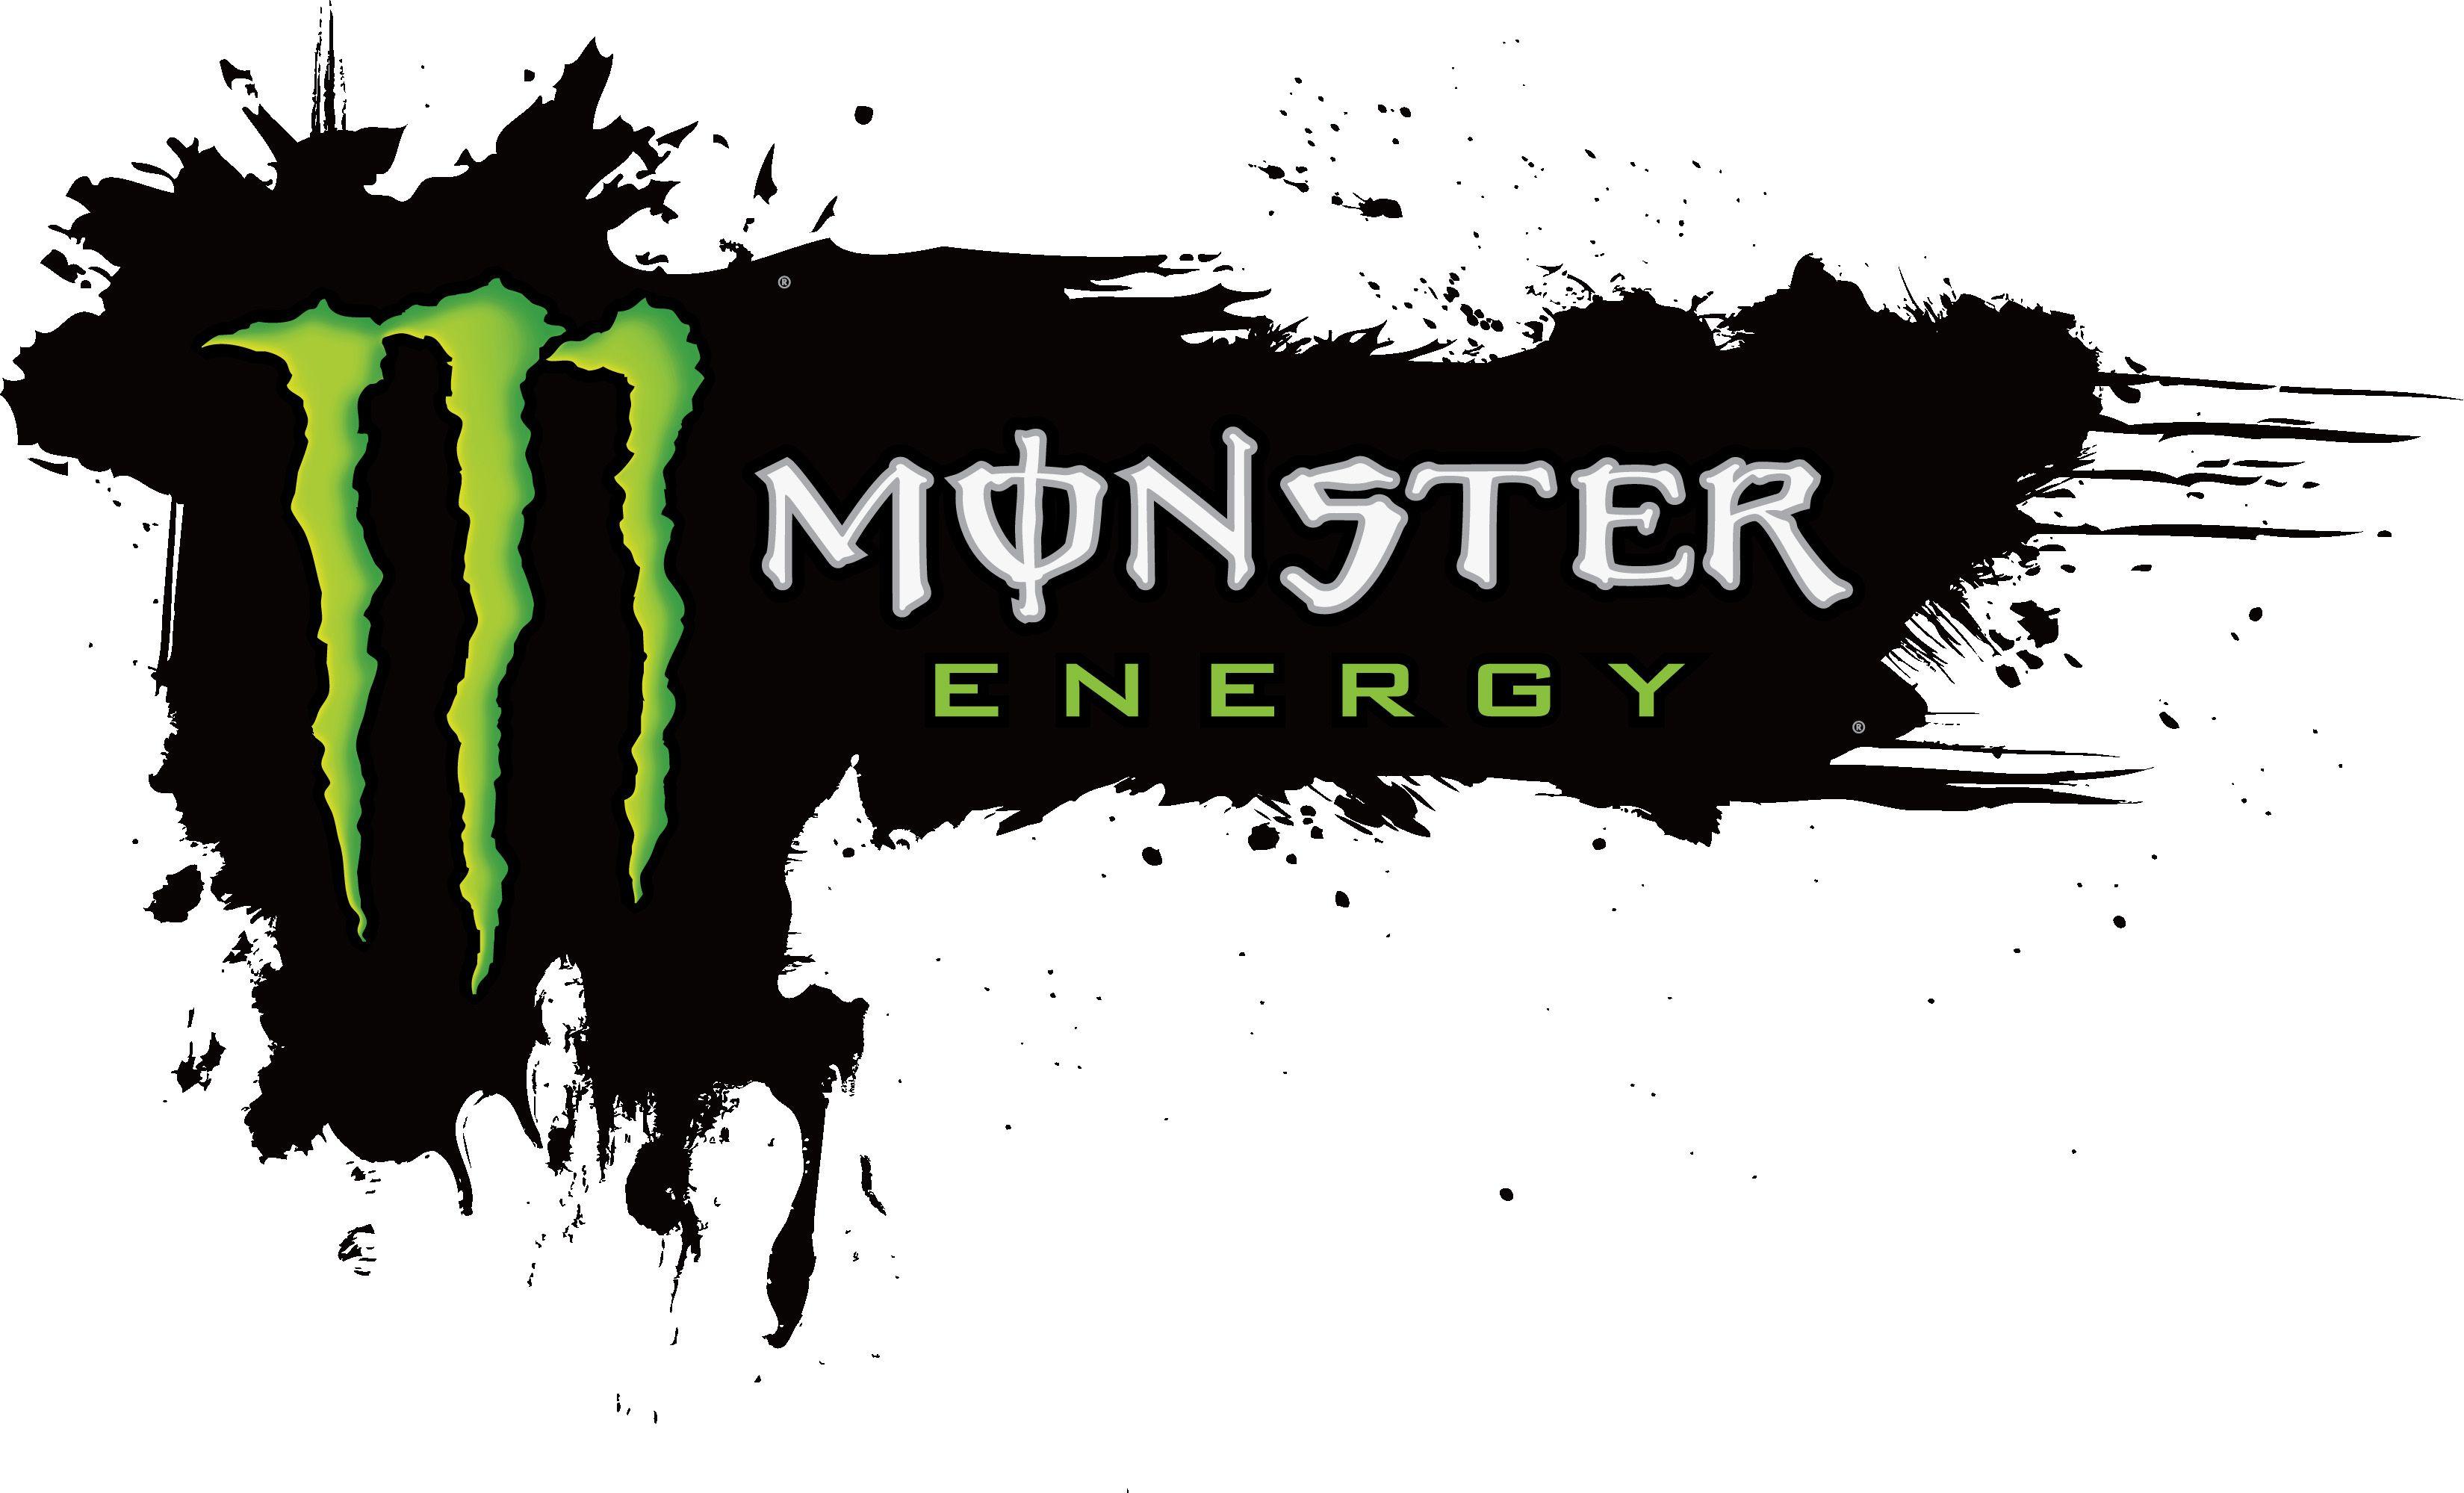 Monster Energy Logo - Monster Energy Logo, Monster Energy Symbol, Meaning, History